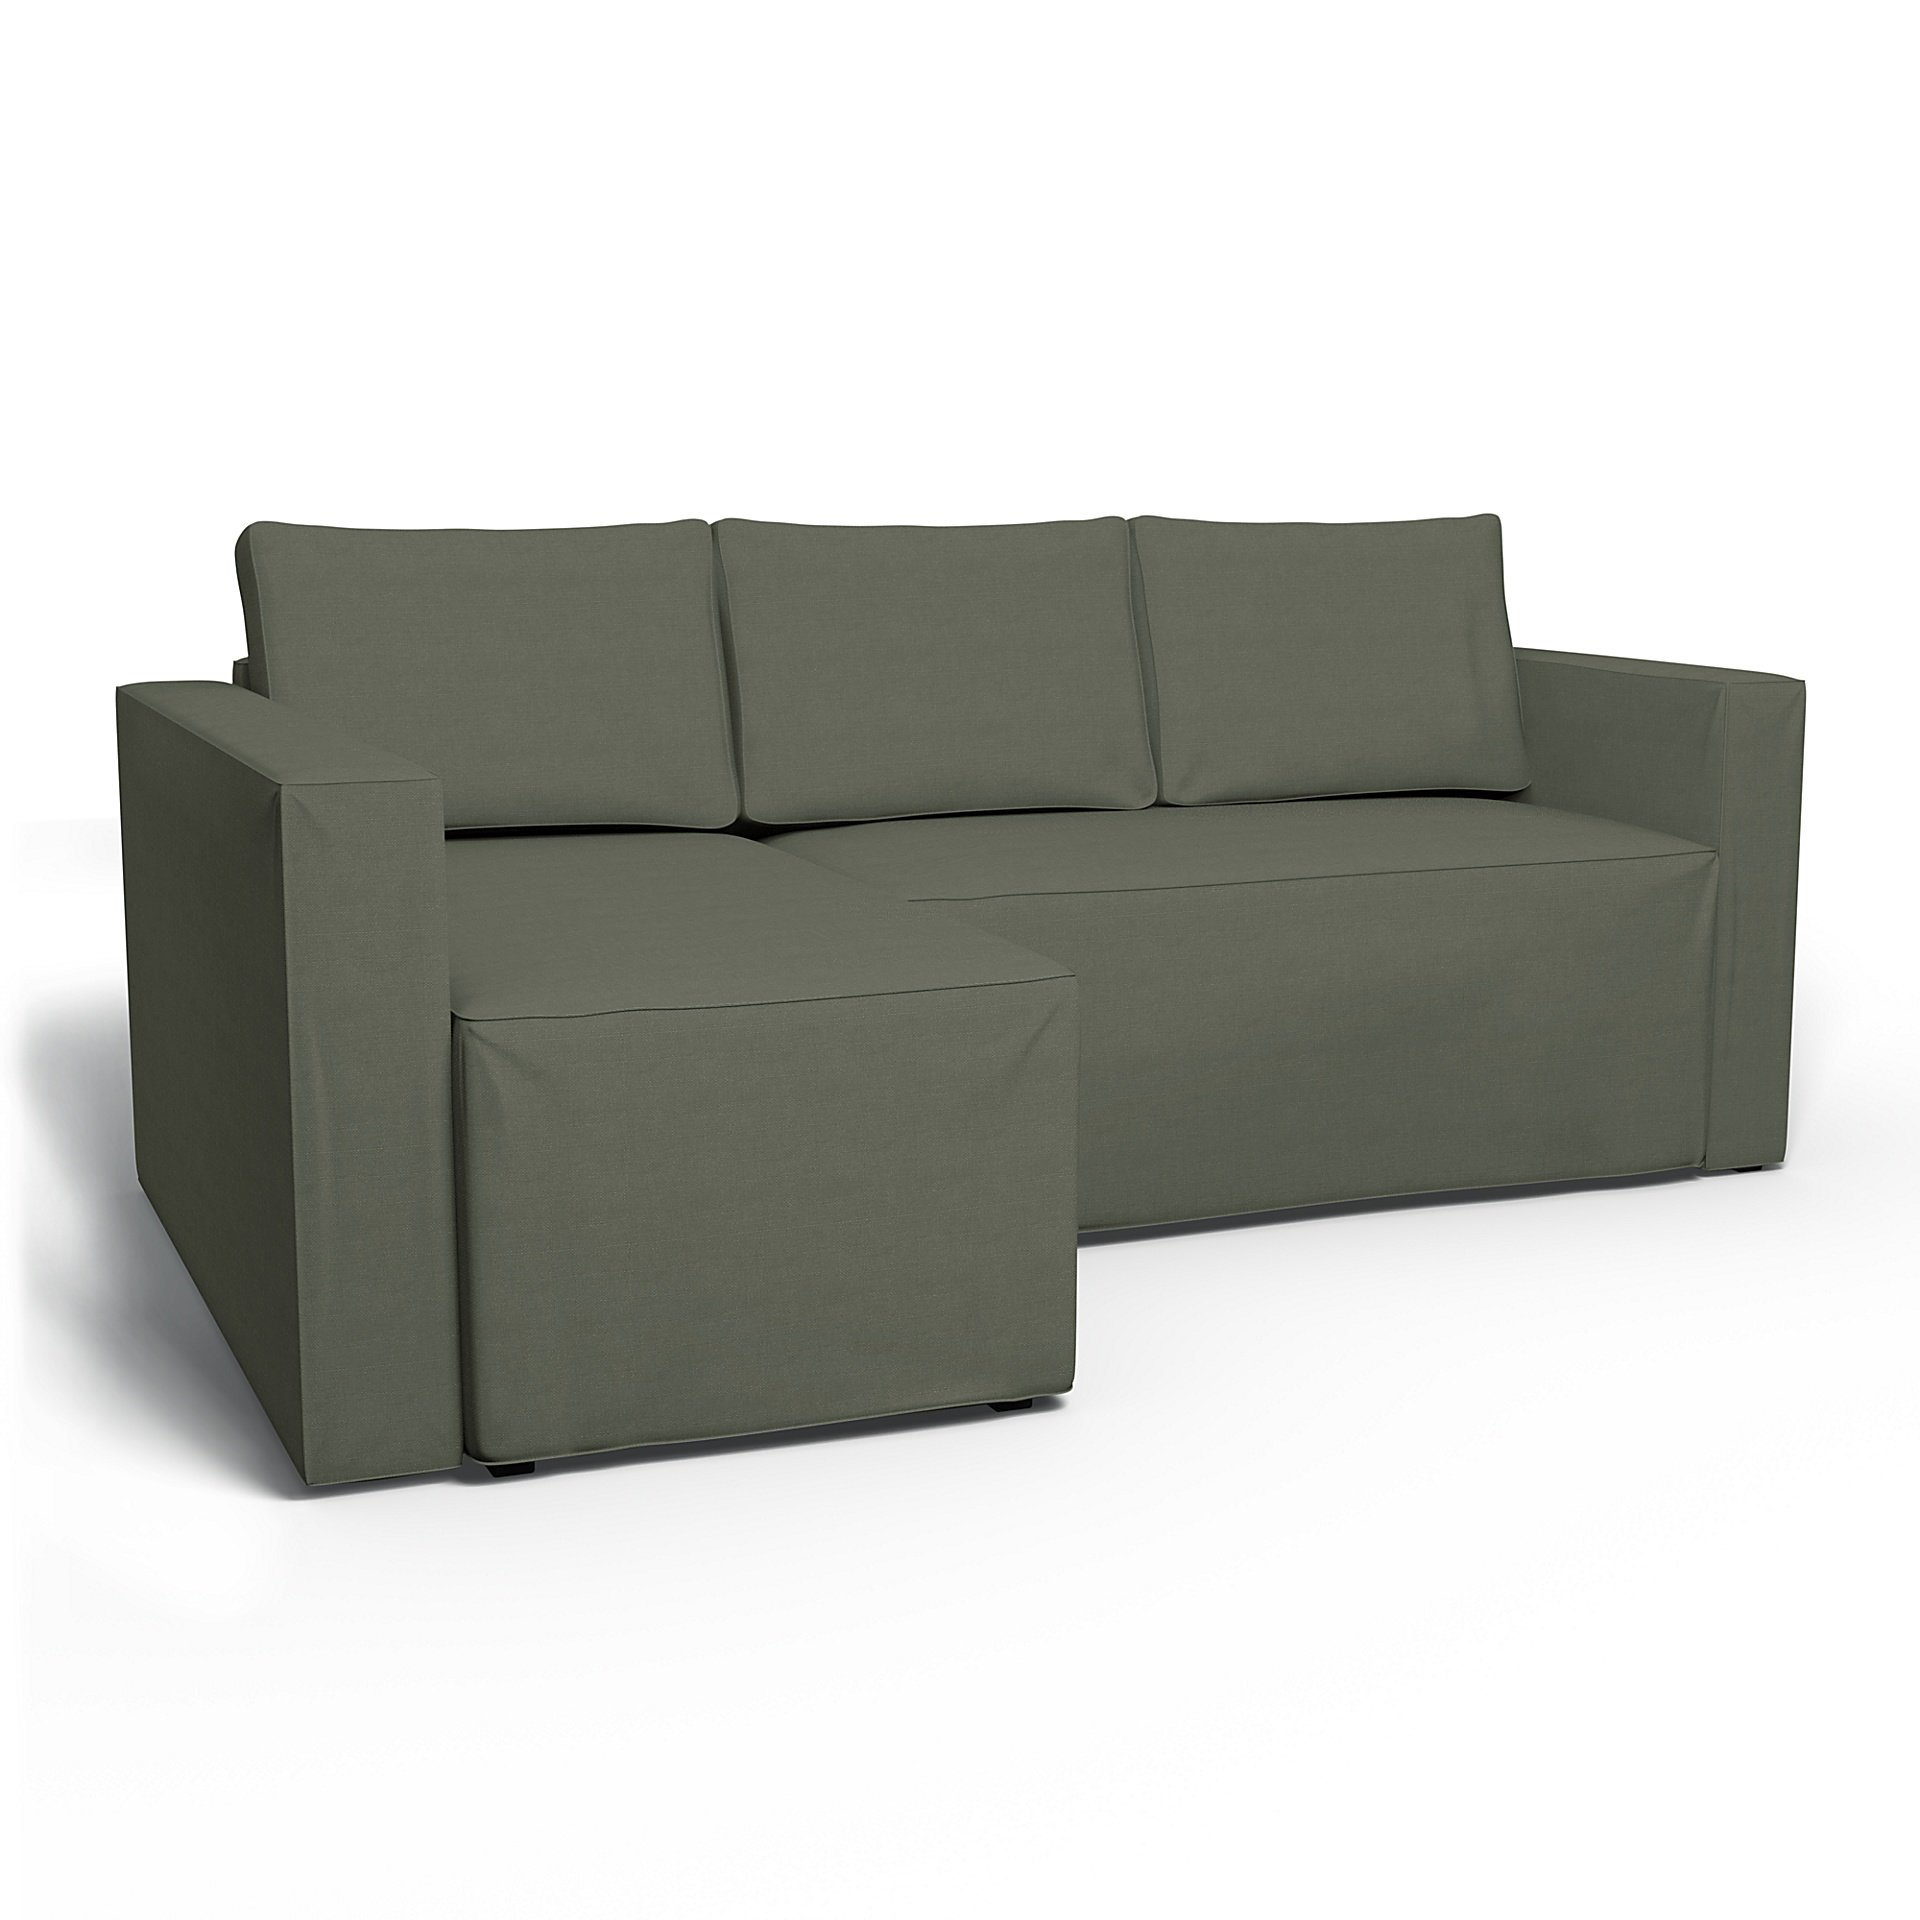 IKEA - Manstad Sofa Bed with Left Chaise Cover, Rosemary, Linen - Bemz